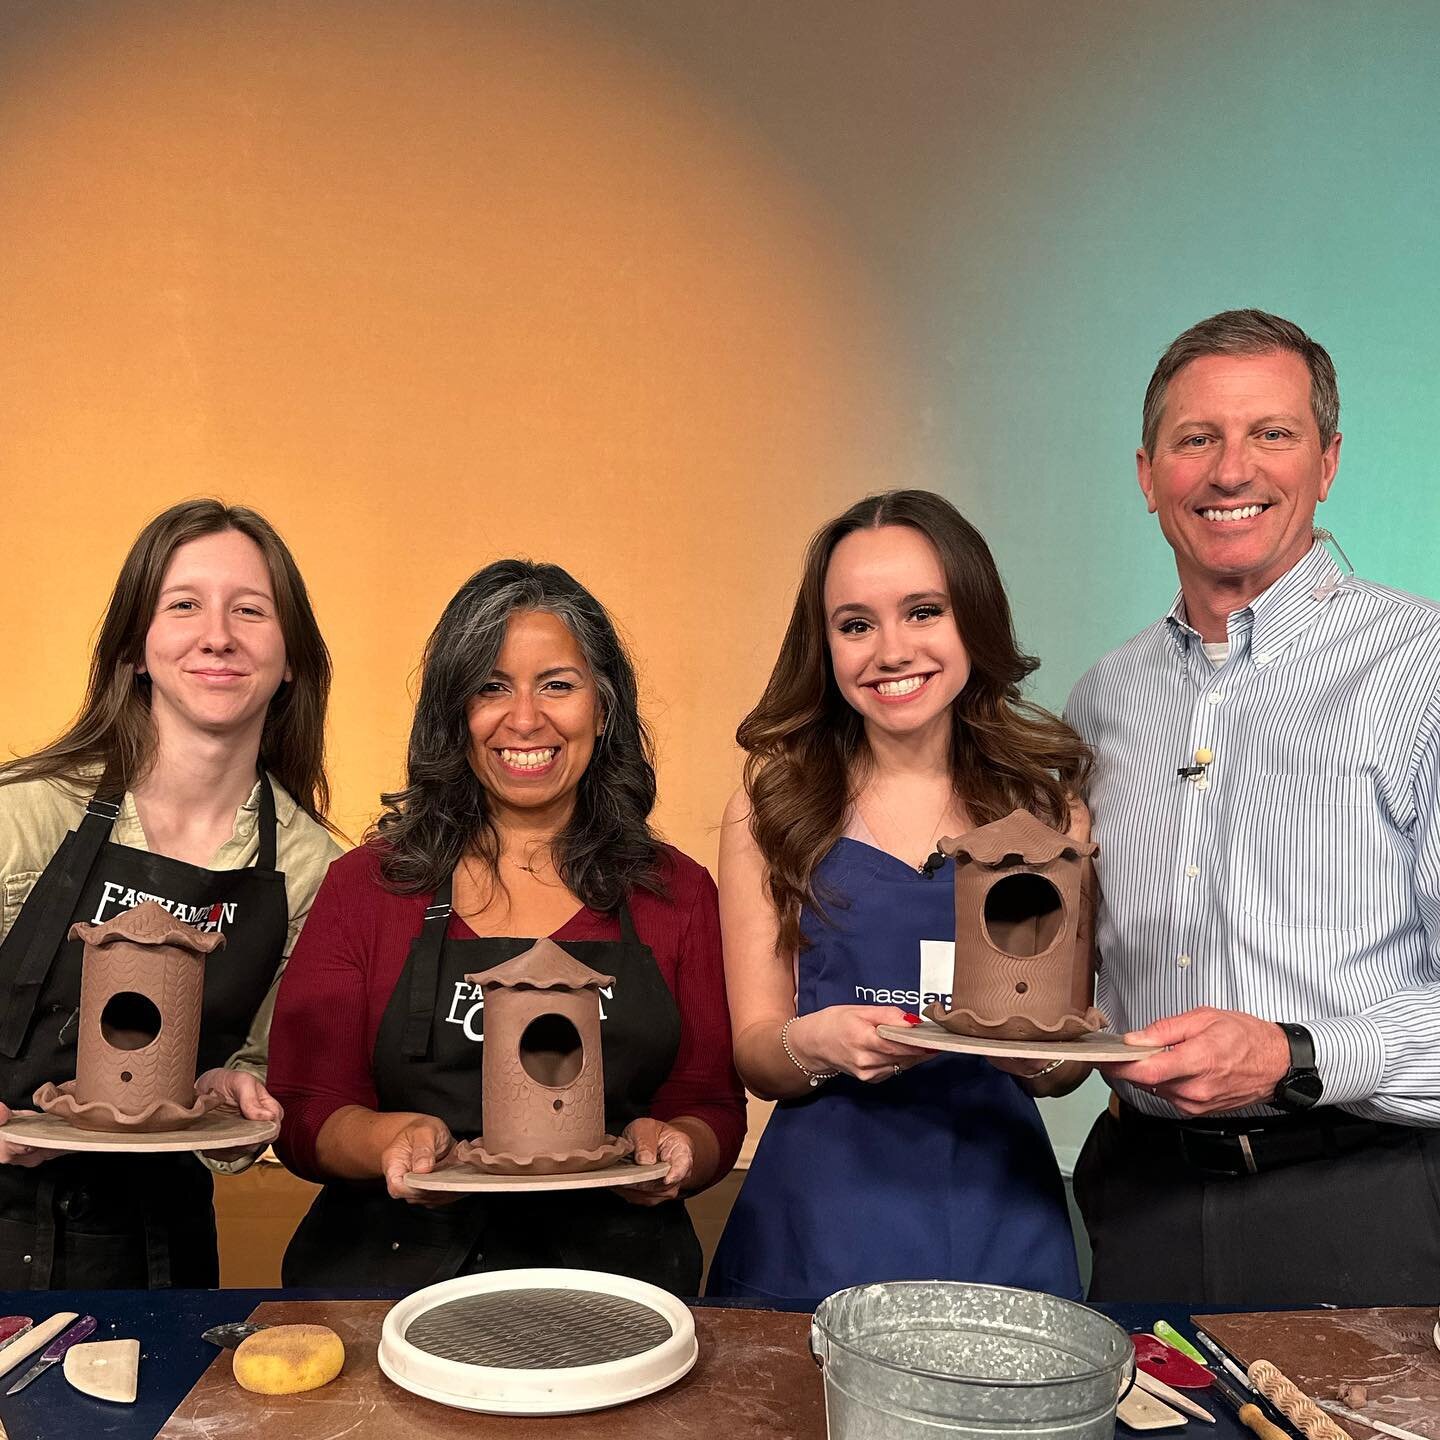 So fun to be on live TV on @massappealwwlp with @kaylahevey and Patrick Berry today! @kaleighjarvis and I made sweet birdhouses with the hosts for Mother&rsquo;s Day 🌸🕊️💕 We were so honored to be there! You can check out our segment and the wonder